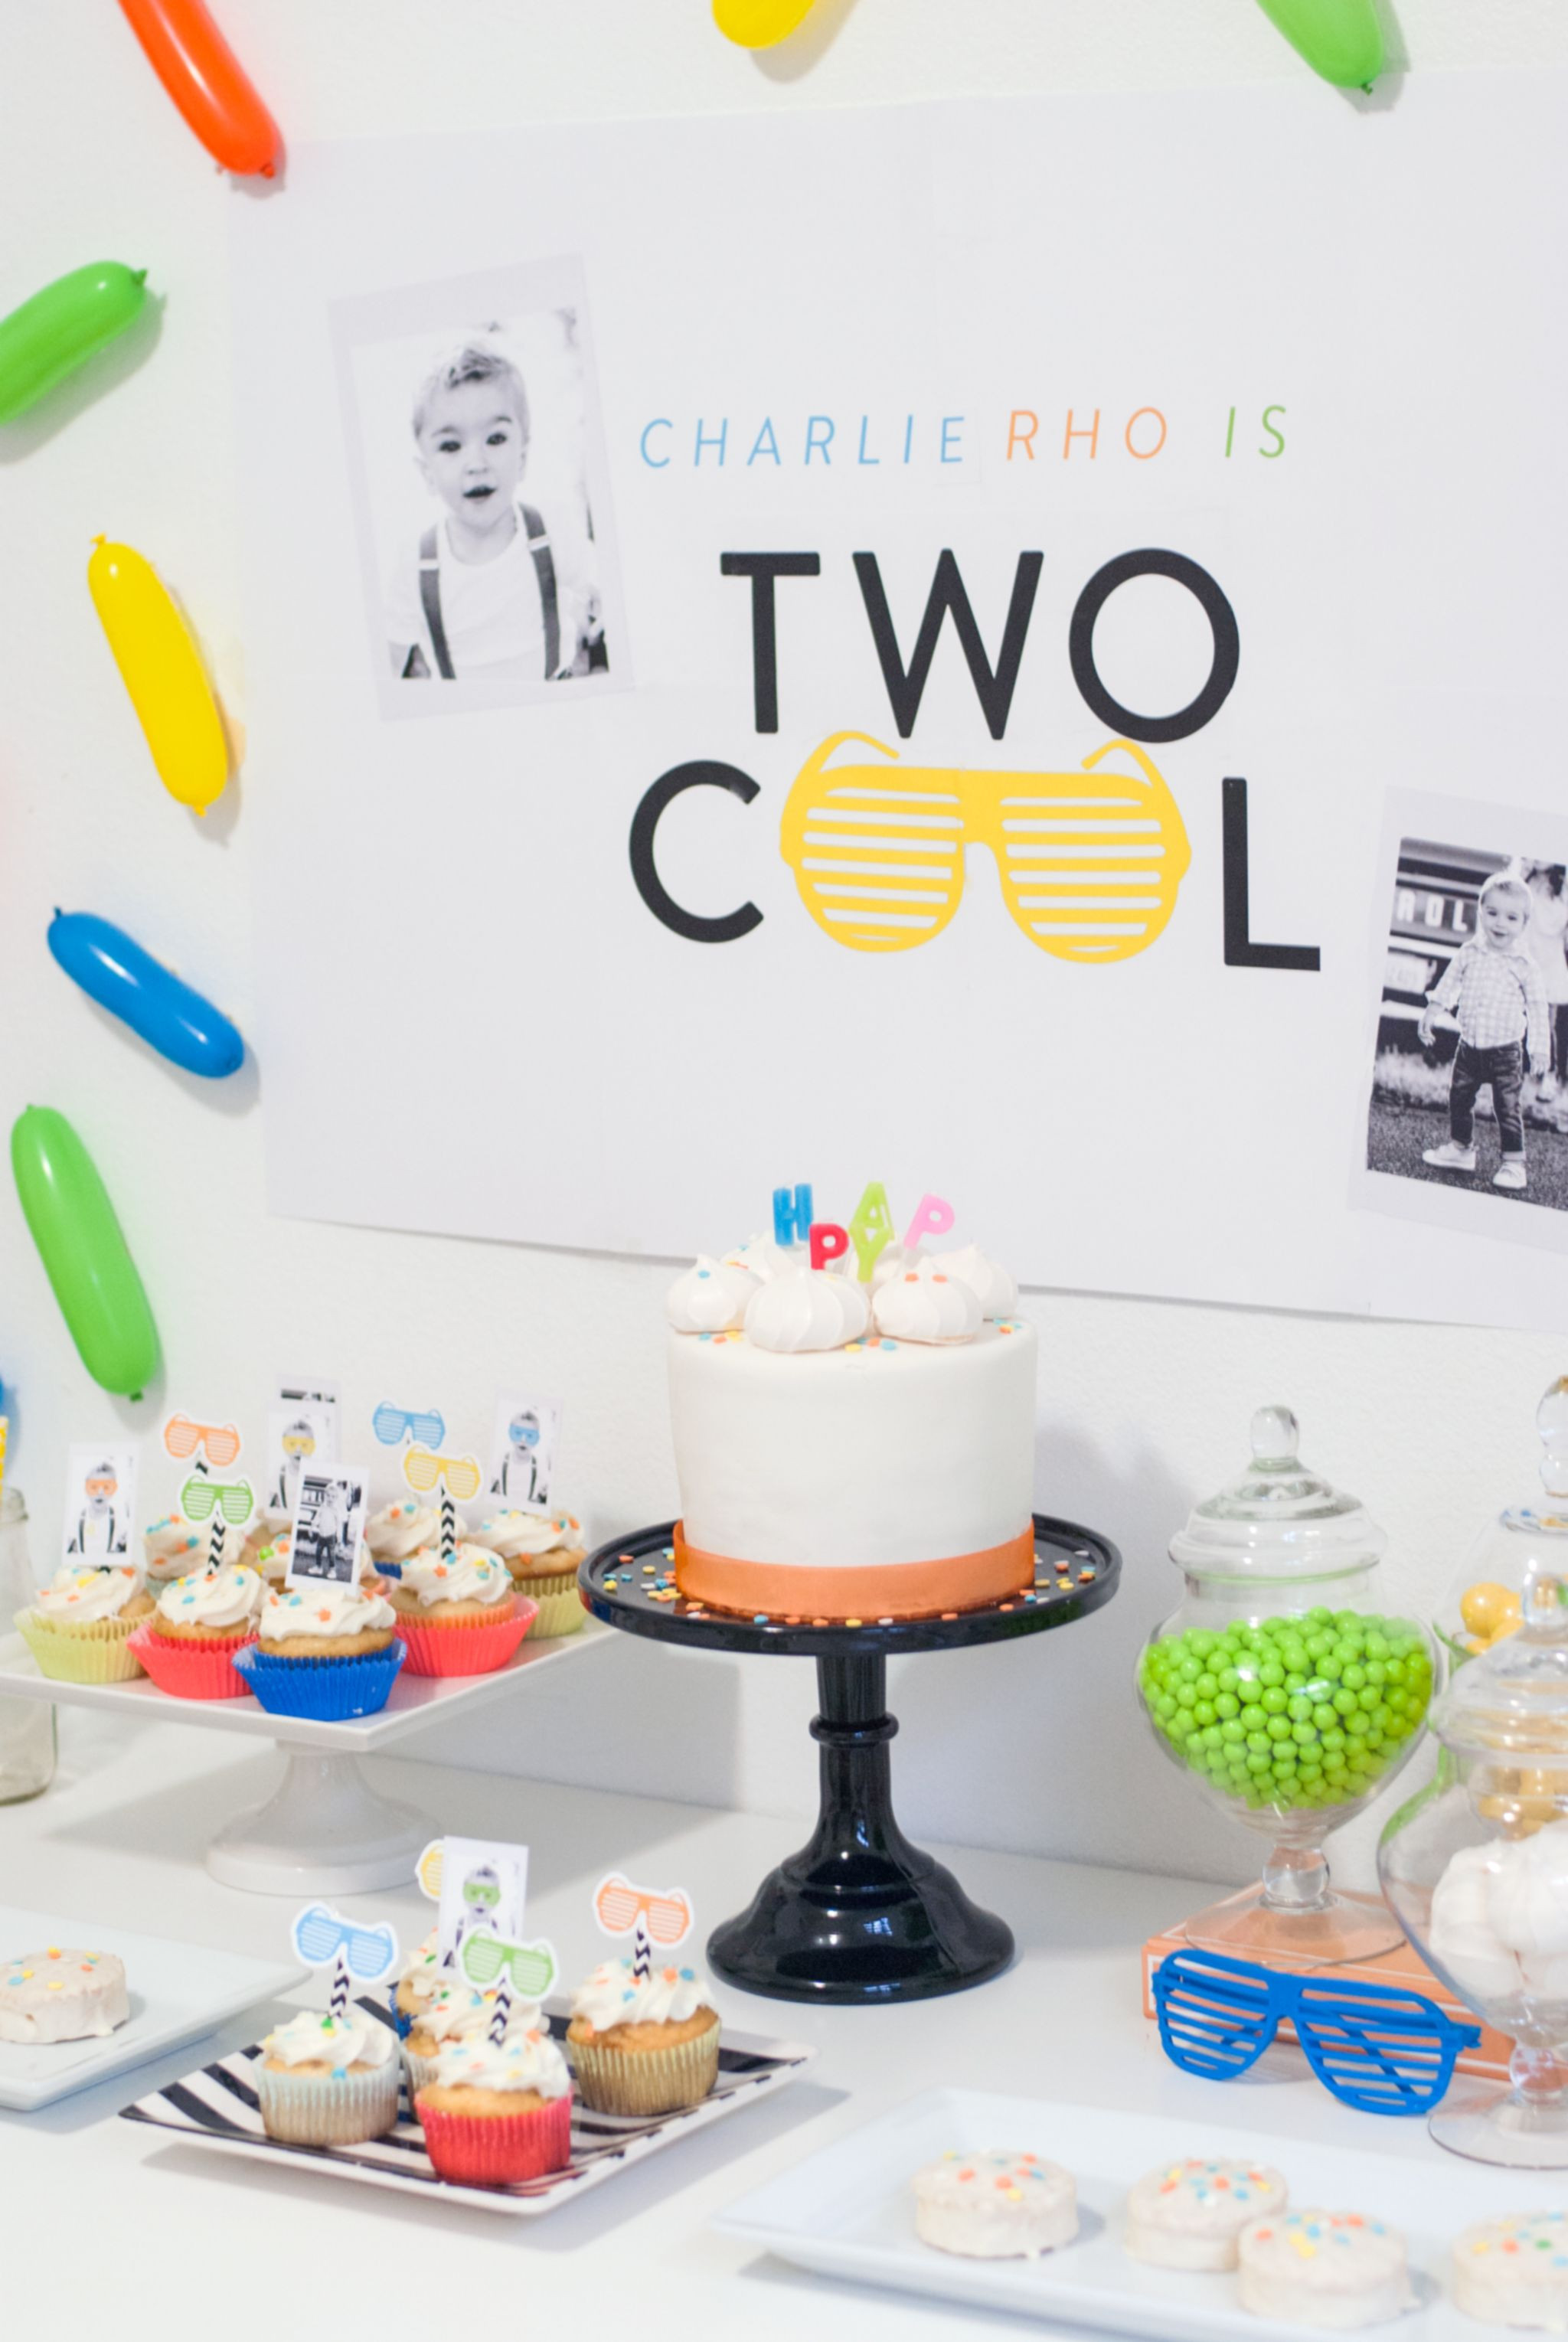 2 Year Old Boy Birthday Party Ideas
 A Two Cool Birthday Party That ll Have You Reaching for